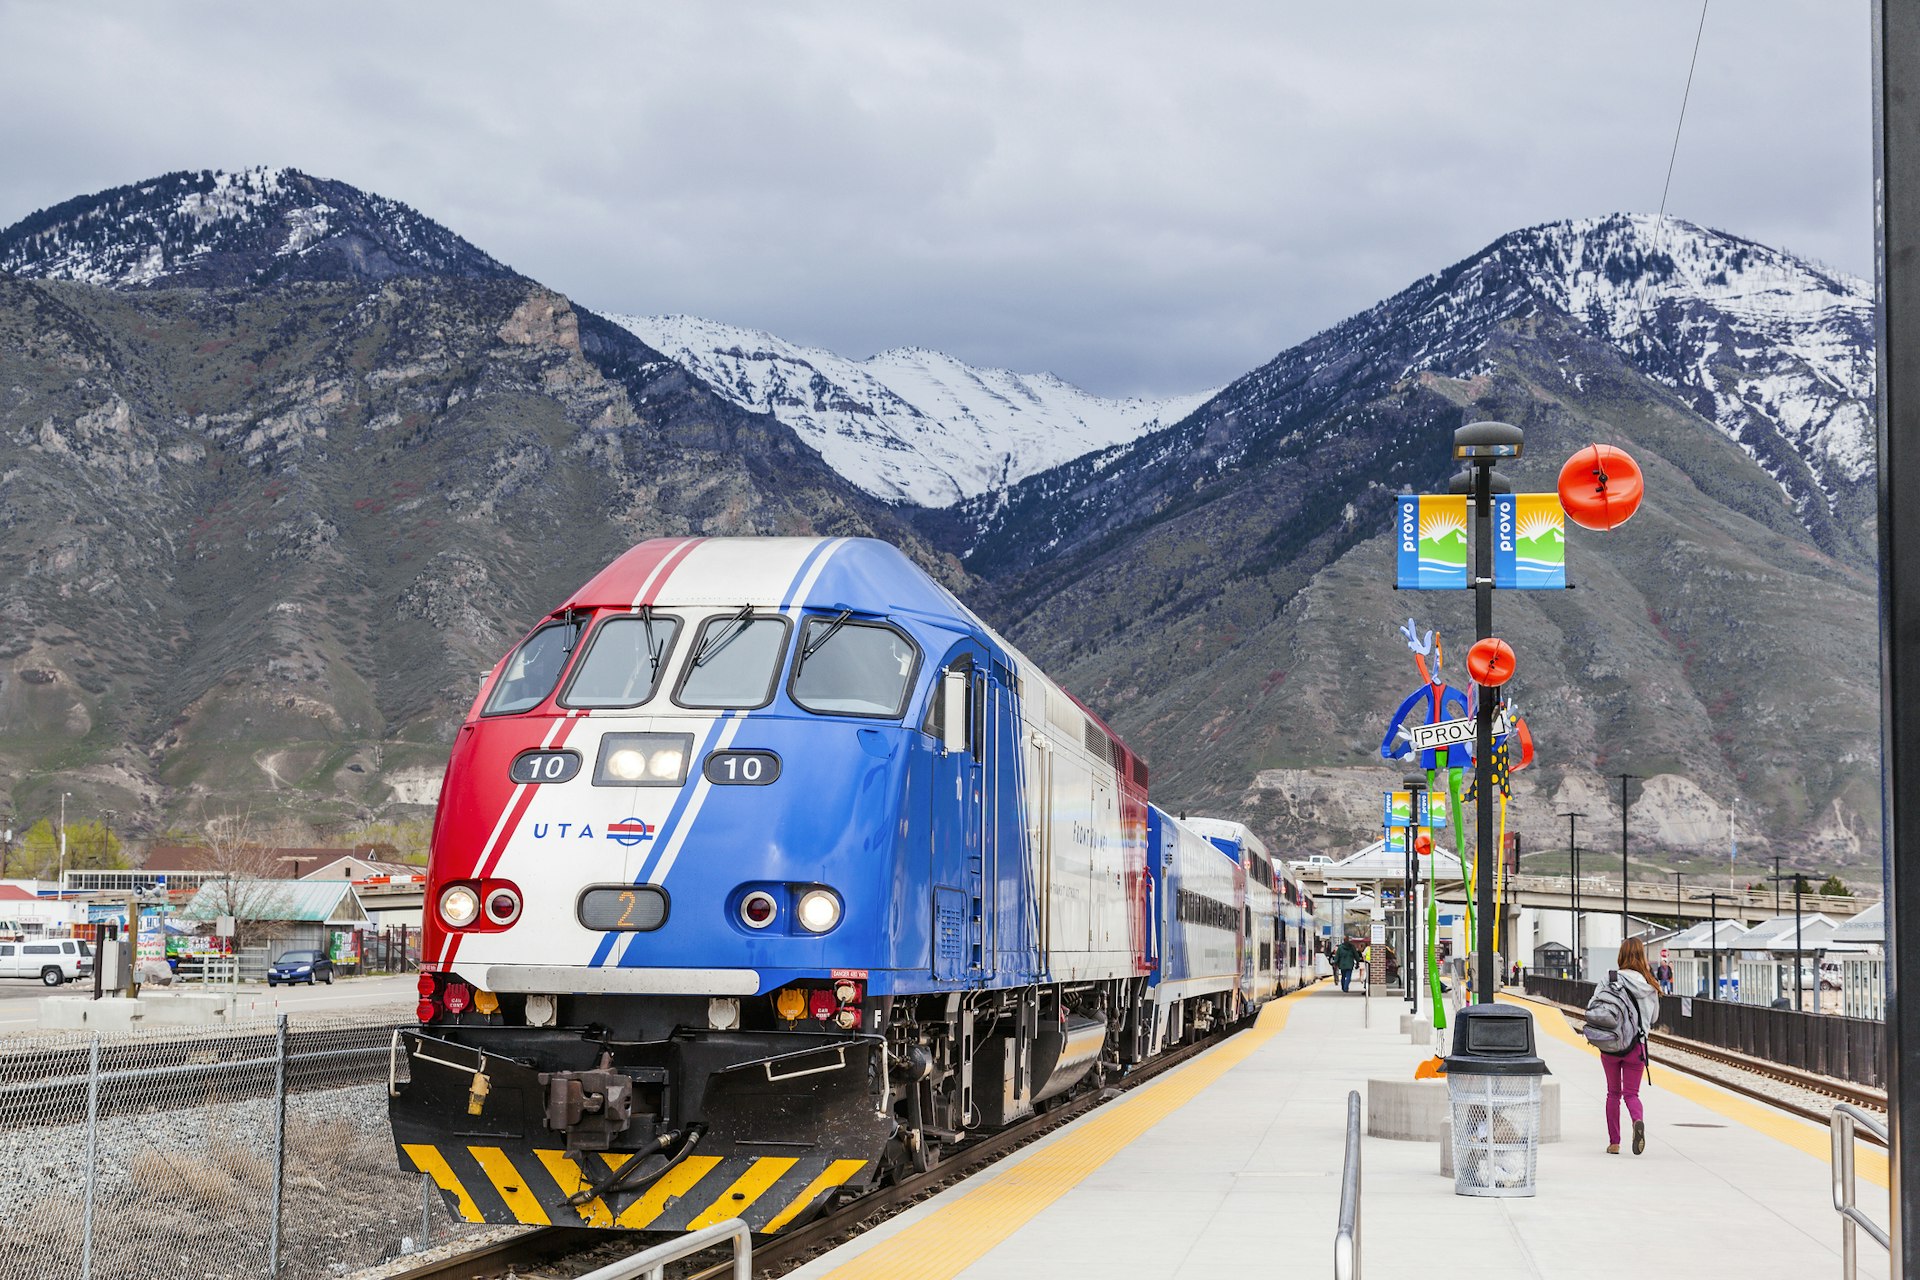 A red, white and blue train engine at a station in a mountainous area